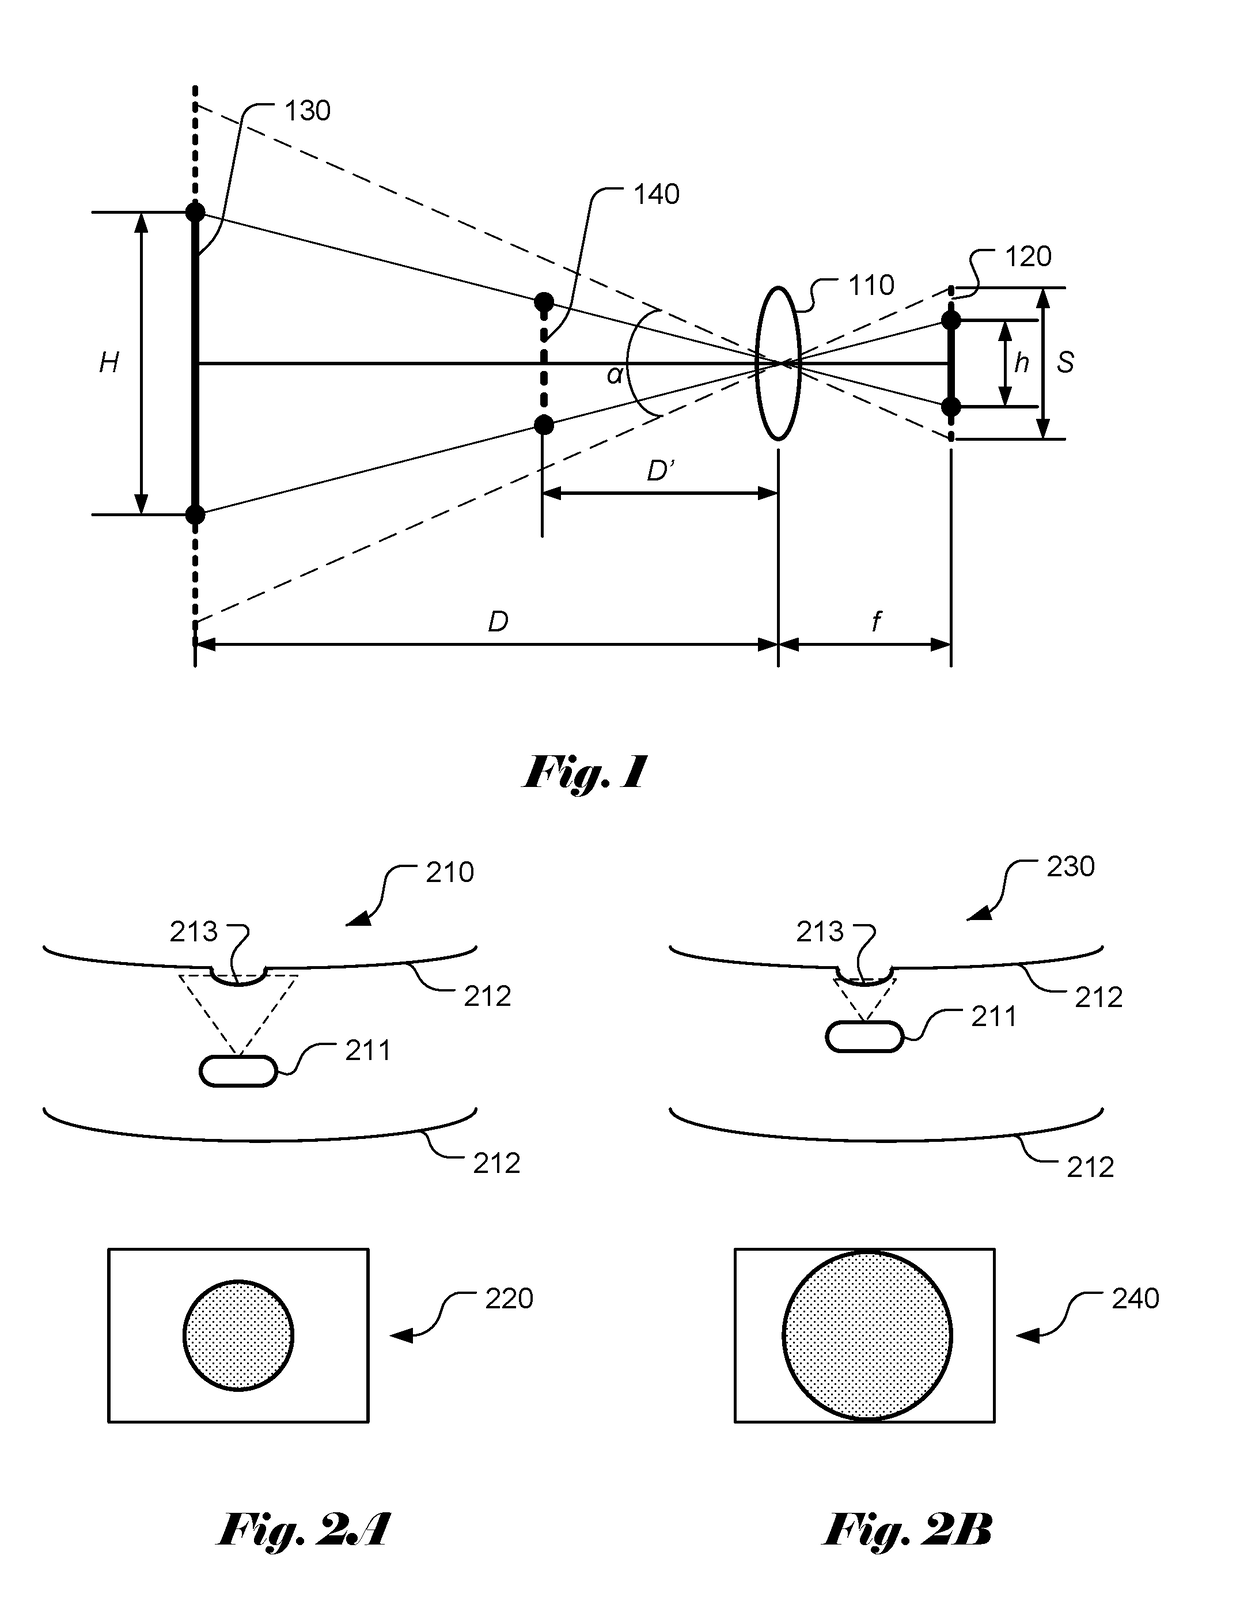 Method and Apparatus for Endoscope with Distance Measuring for Object Scaling